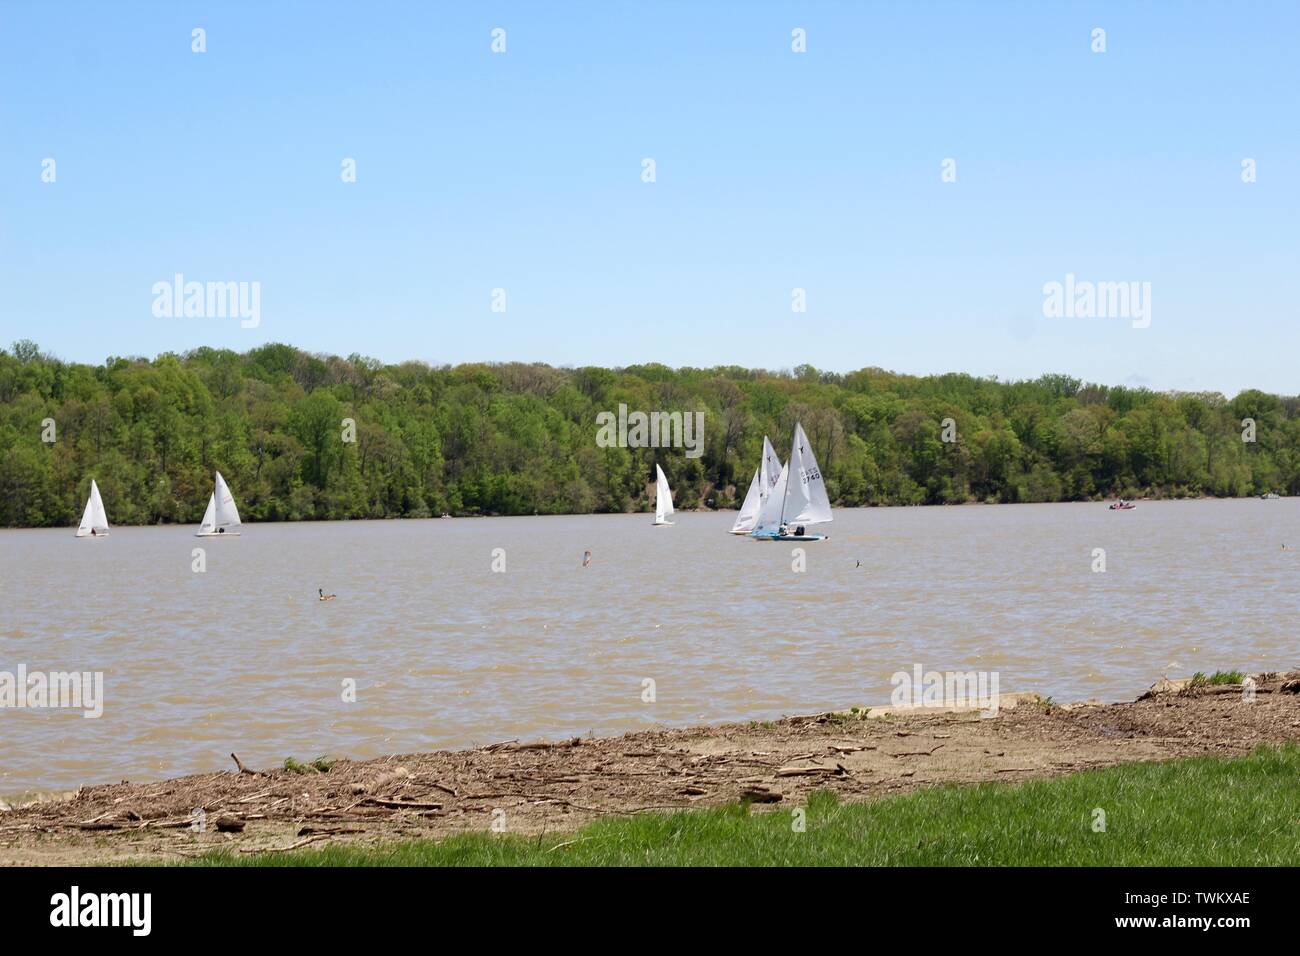 A day of boats on the water of the lake at Hueston Woods State Park in Ohio. Stock Photo